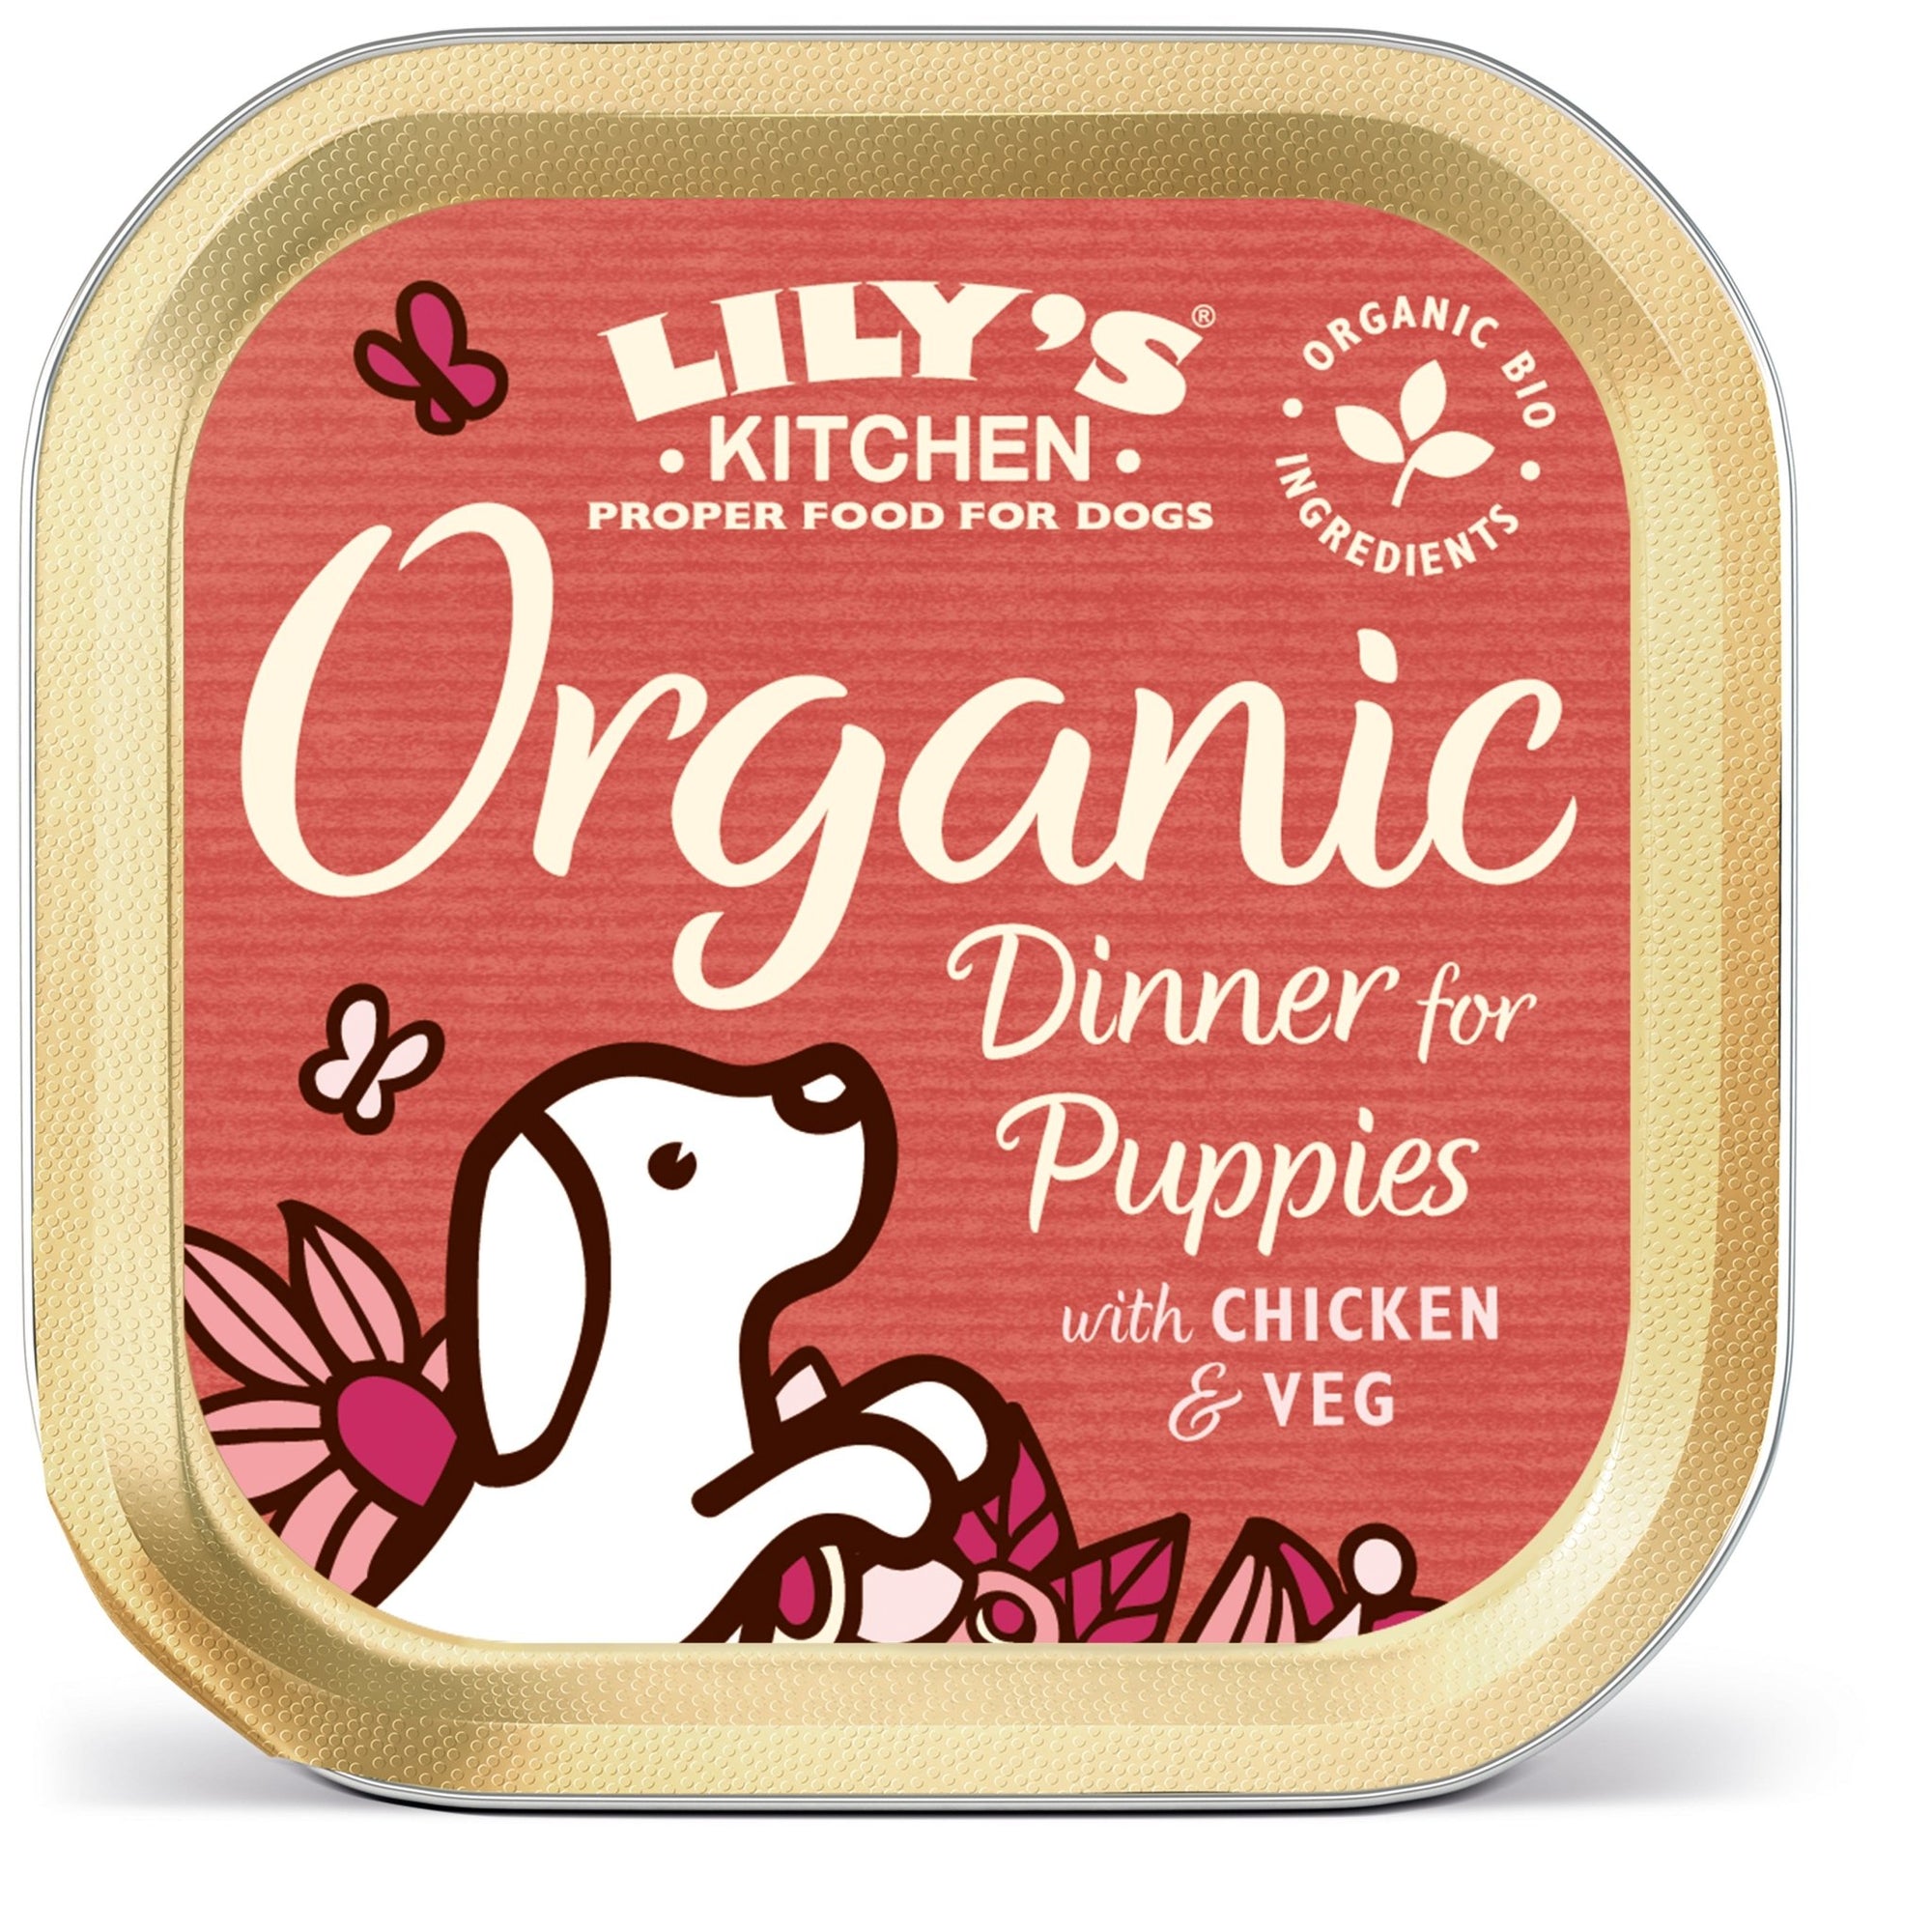 Lily's Kitchen Organic Dinner for Puppies Foil 11x150g, Lily's Kitchen,